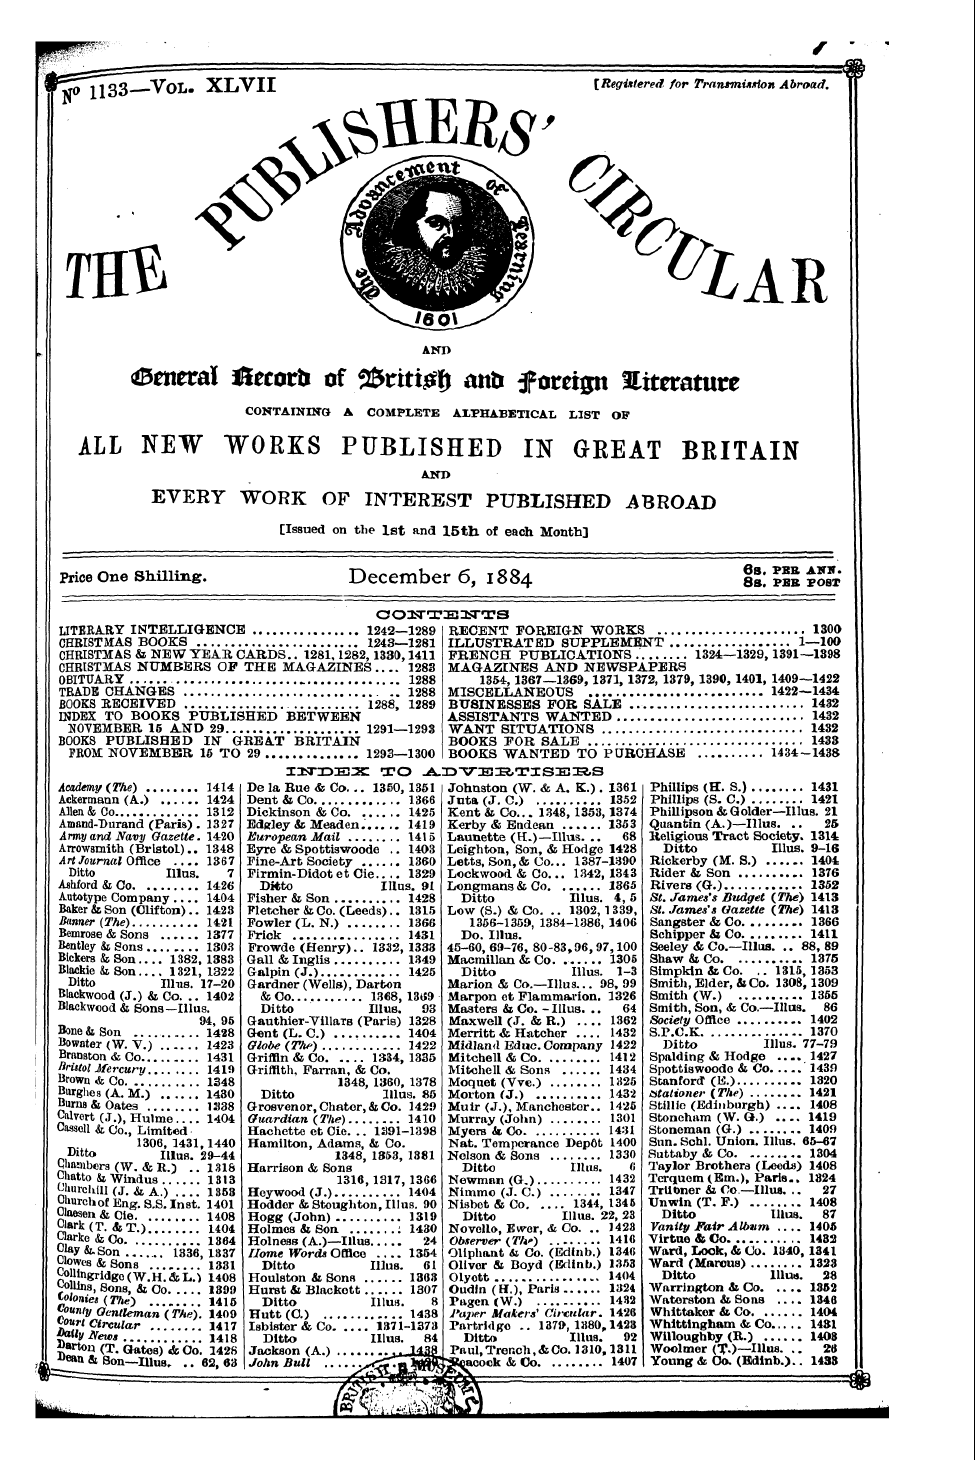 Publishers’ Circular (1880-1890): jS F Y, 1st edition - O O^Tte 3stts